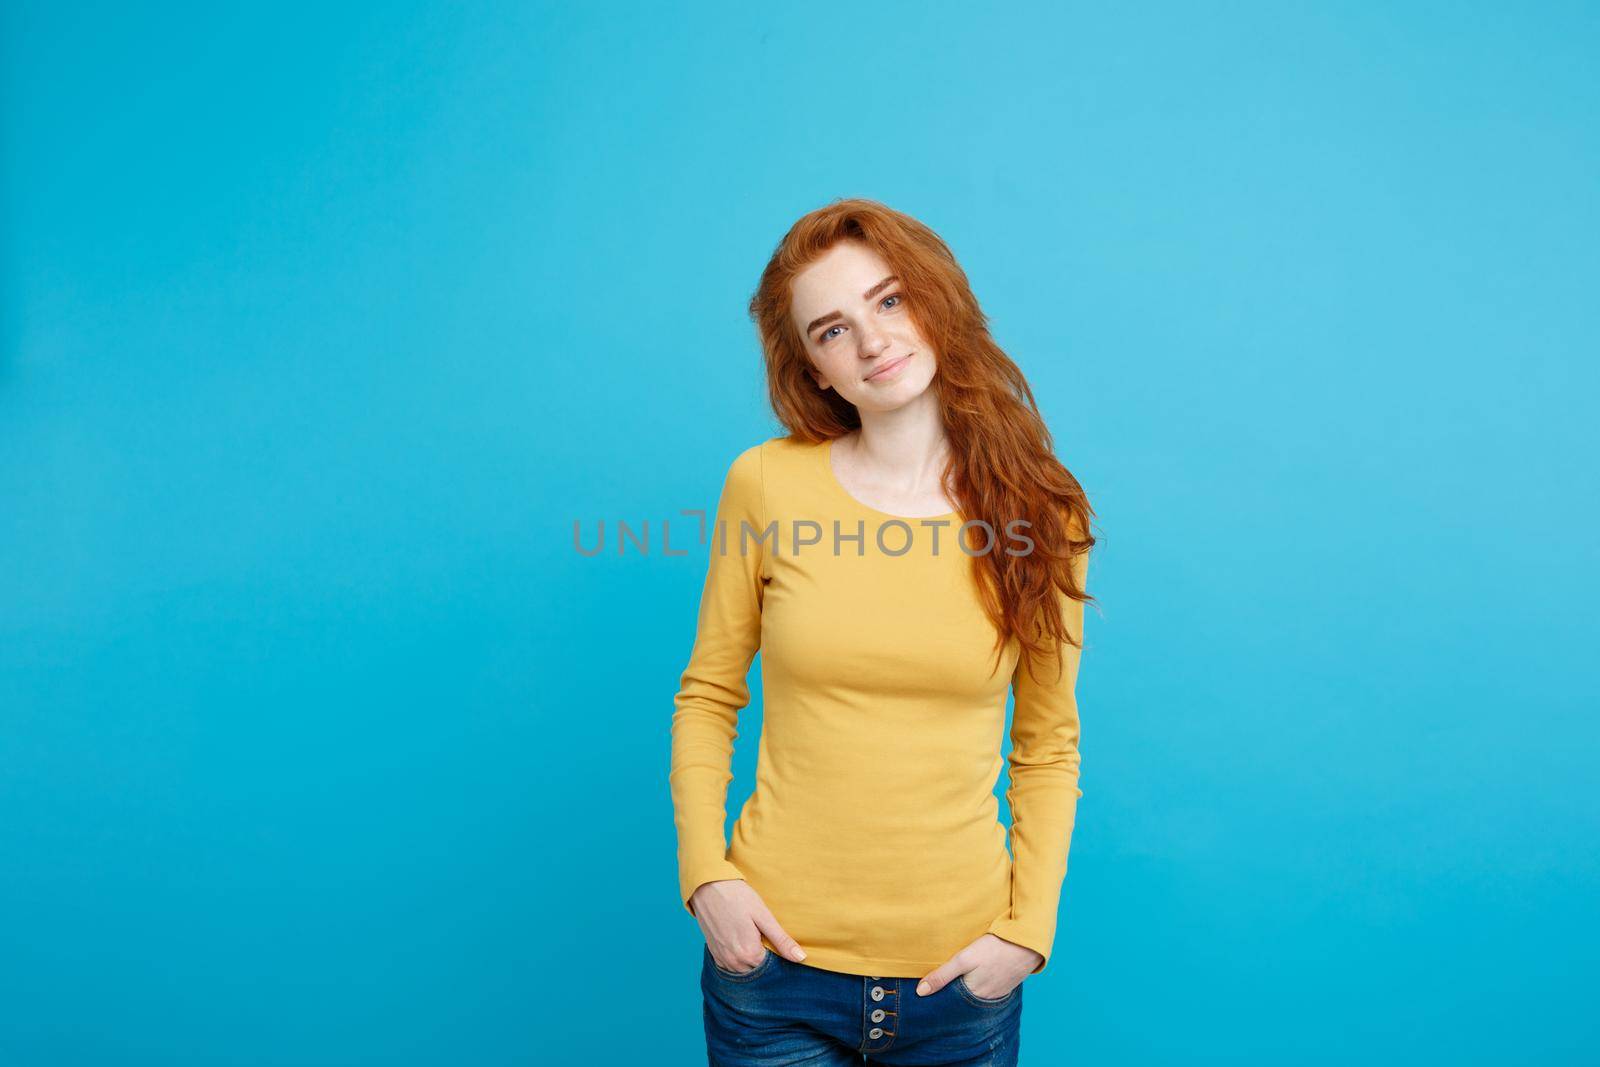 Portrait of young beautiful ginger woman with freckles cheerfuly smiling looking at camera. Isolated on pastel blue background. Copy space.